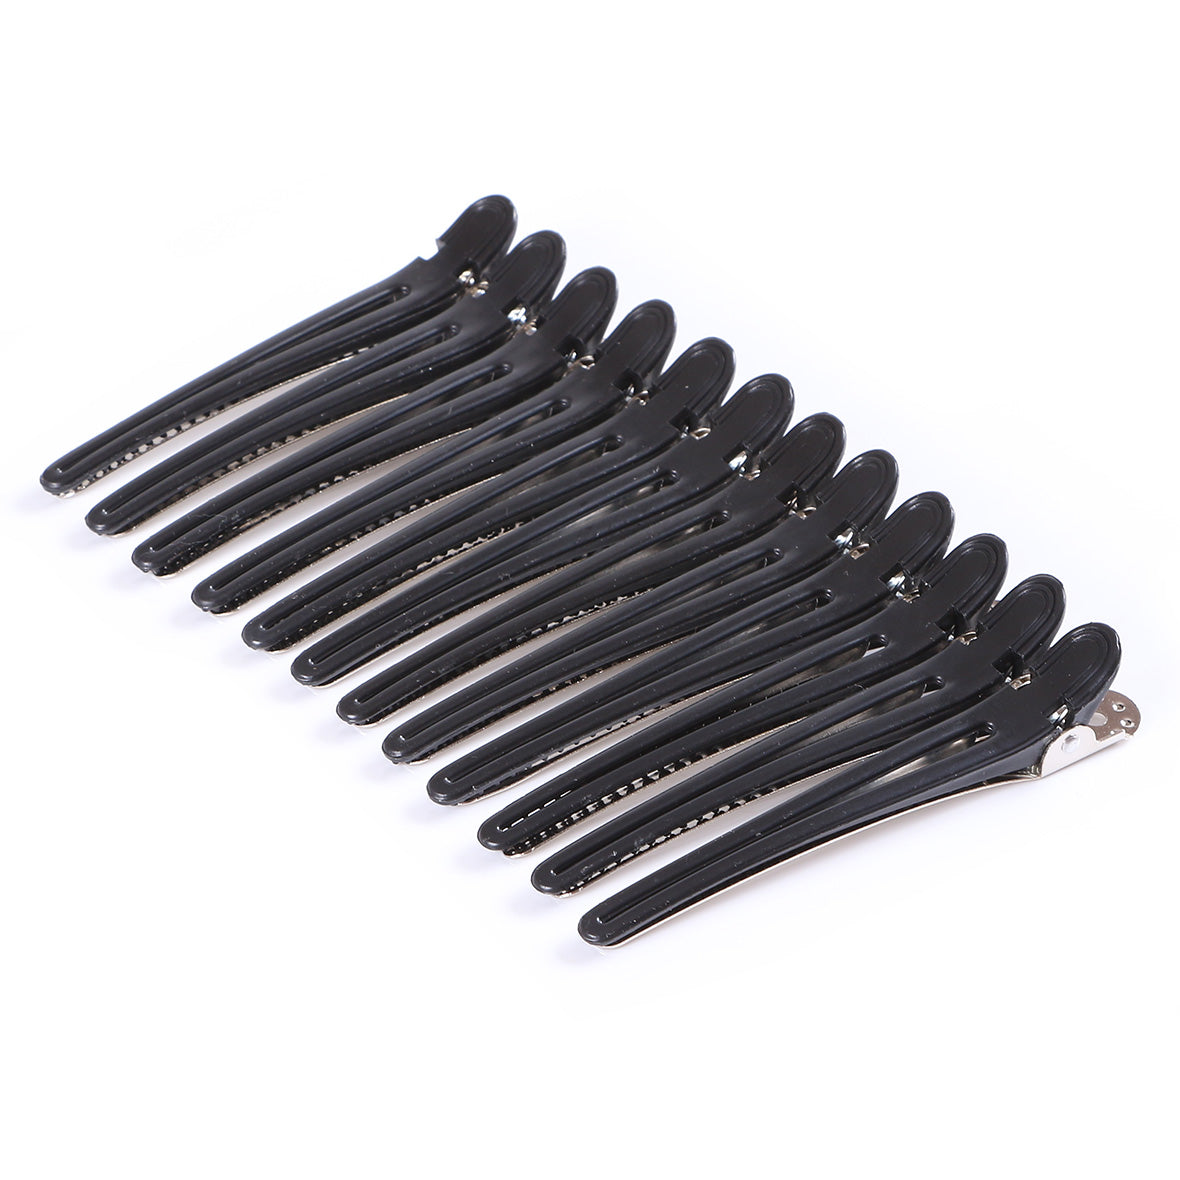 12 Pack Duck Bill Clips Alligator Curl Clips Hair Clips for Styling and Sectioning,Professional Hair Clips for Women - Salon Hair Clips Accessories